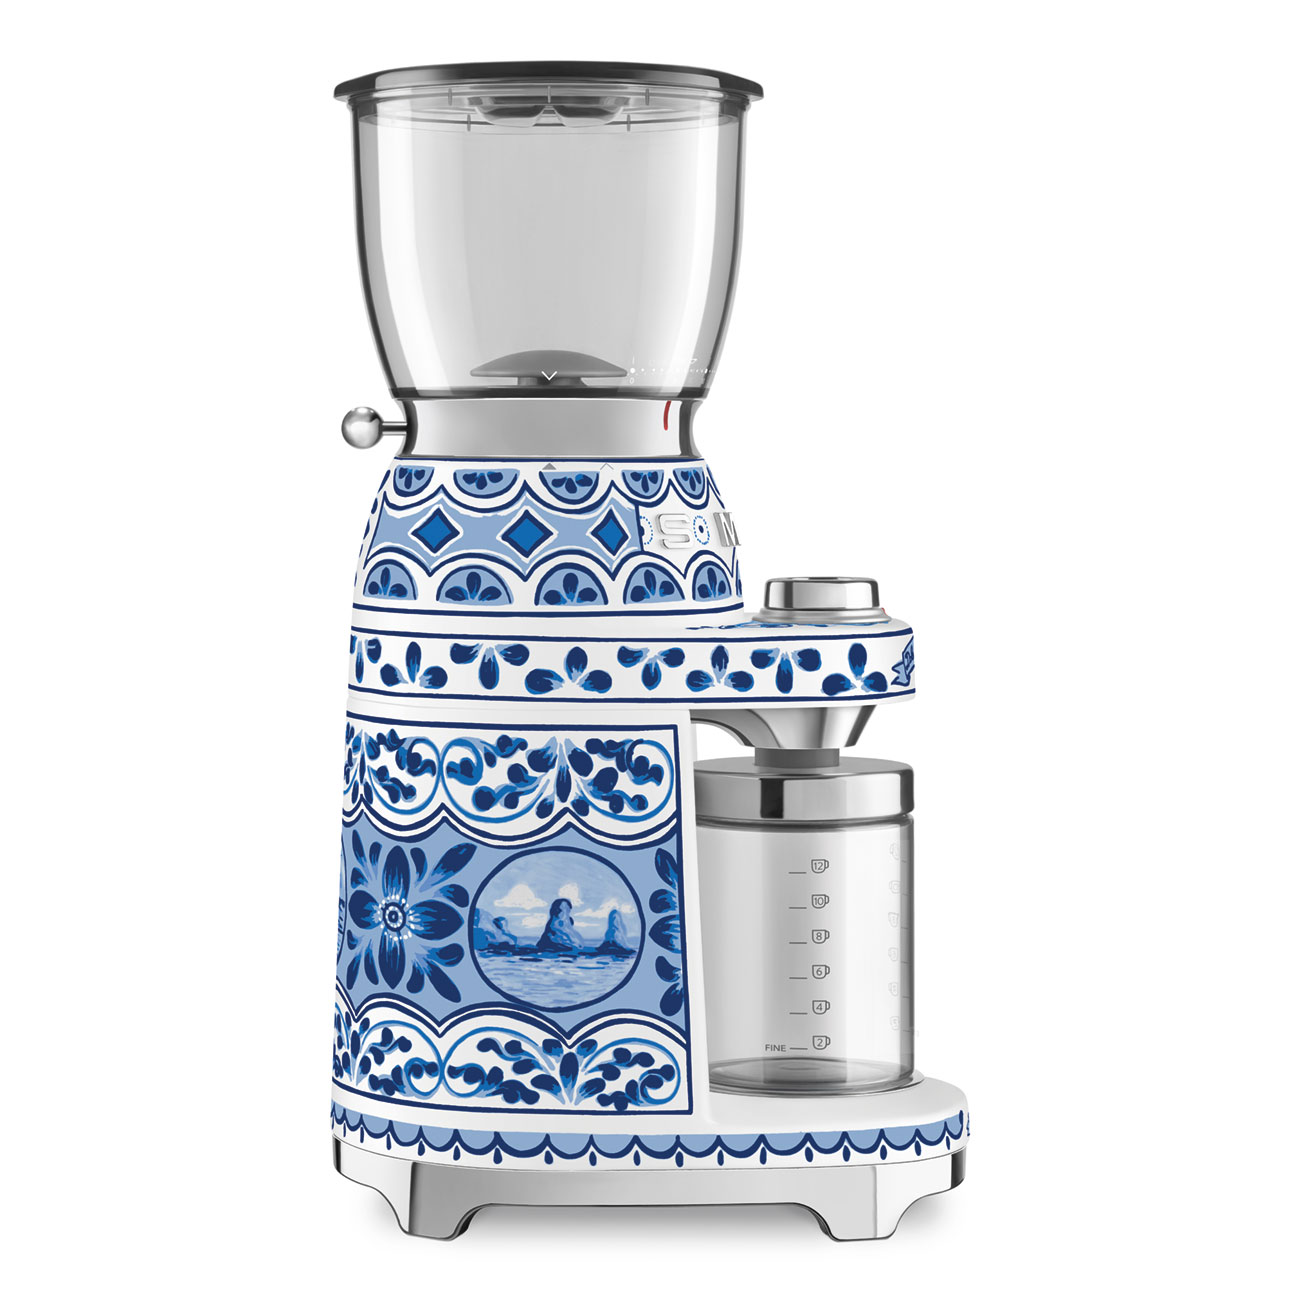 Decorated / Special Coffee Grinder featuring a conical burr - CGF01DGBUK - Smeg_3